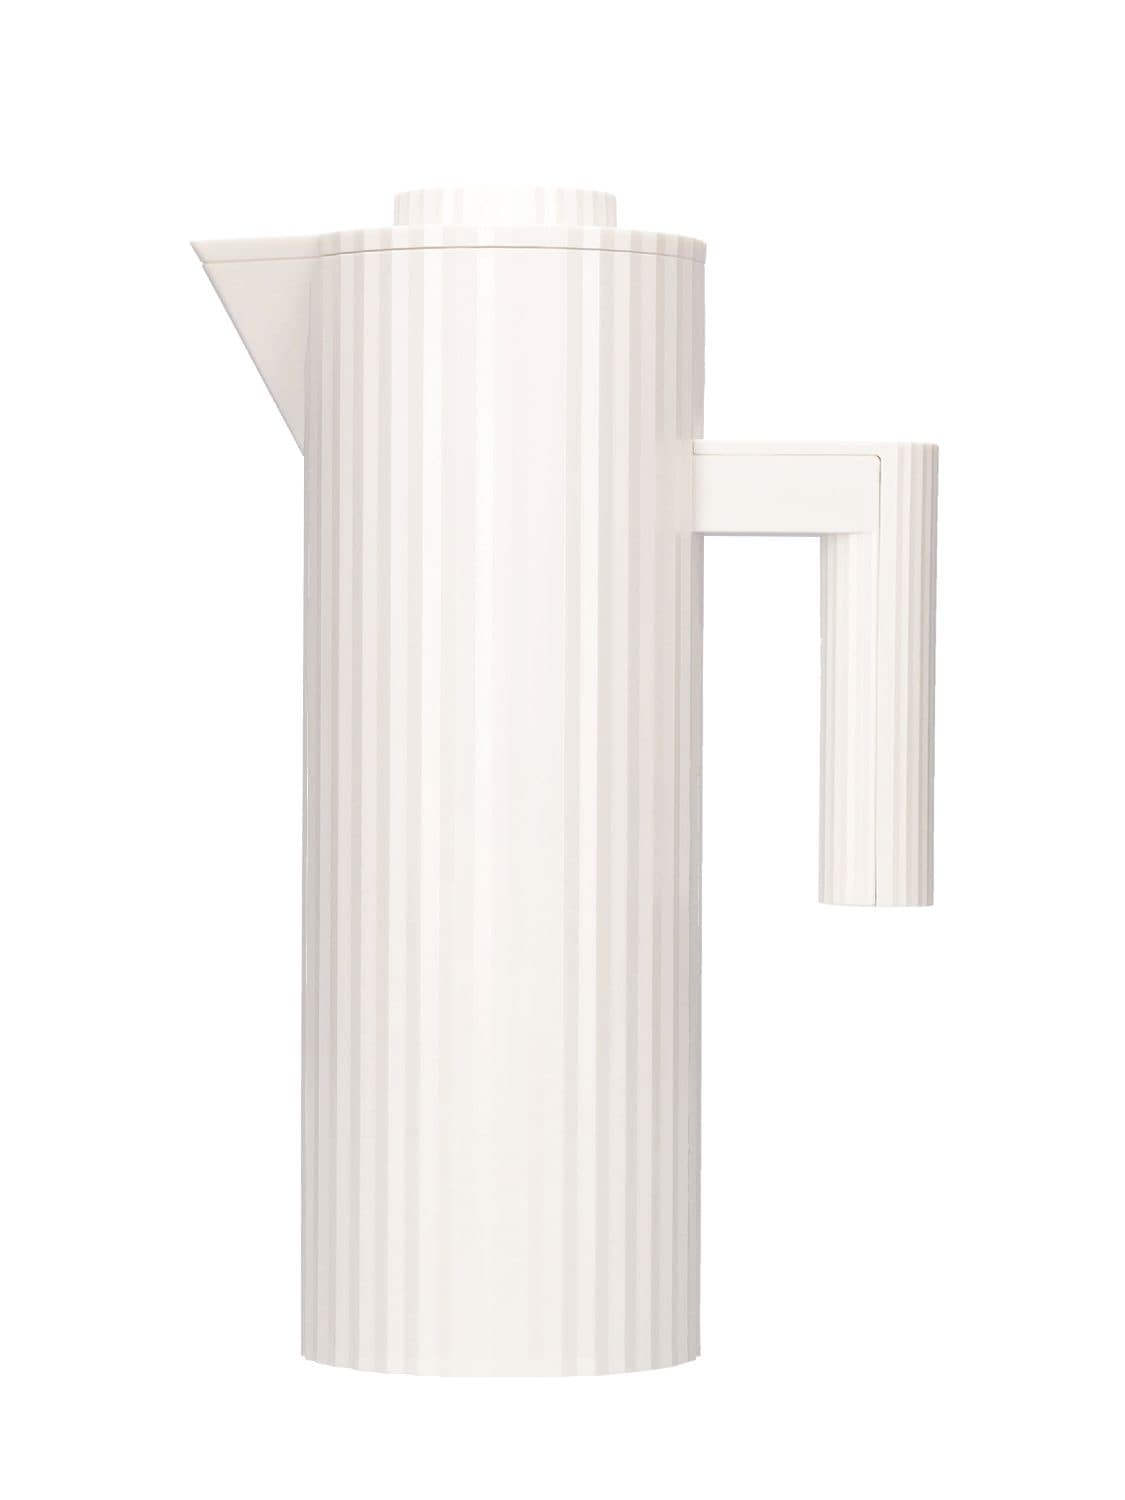 Alessi Plissé Insulated Pitcher In White